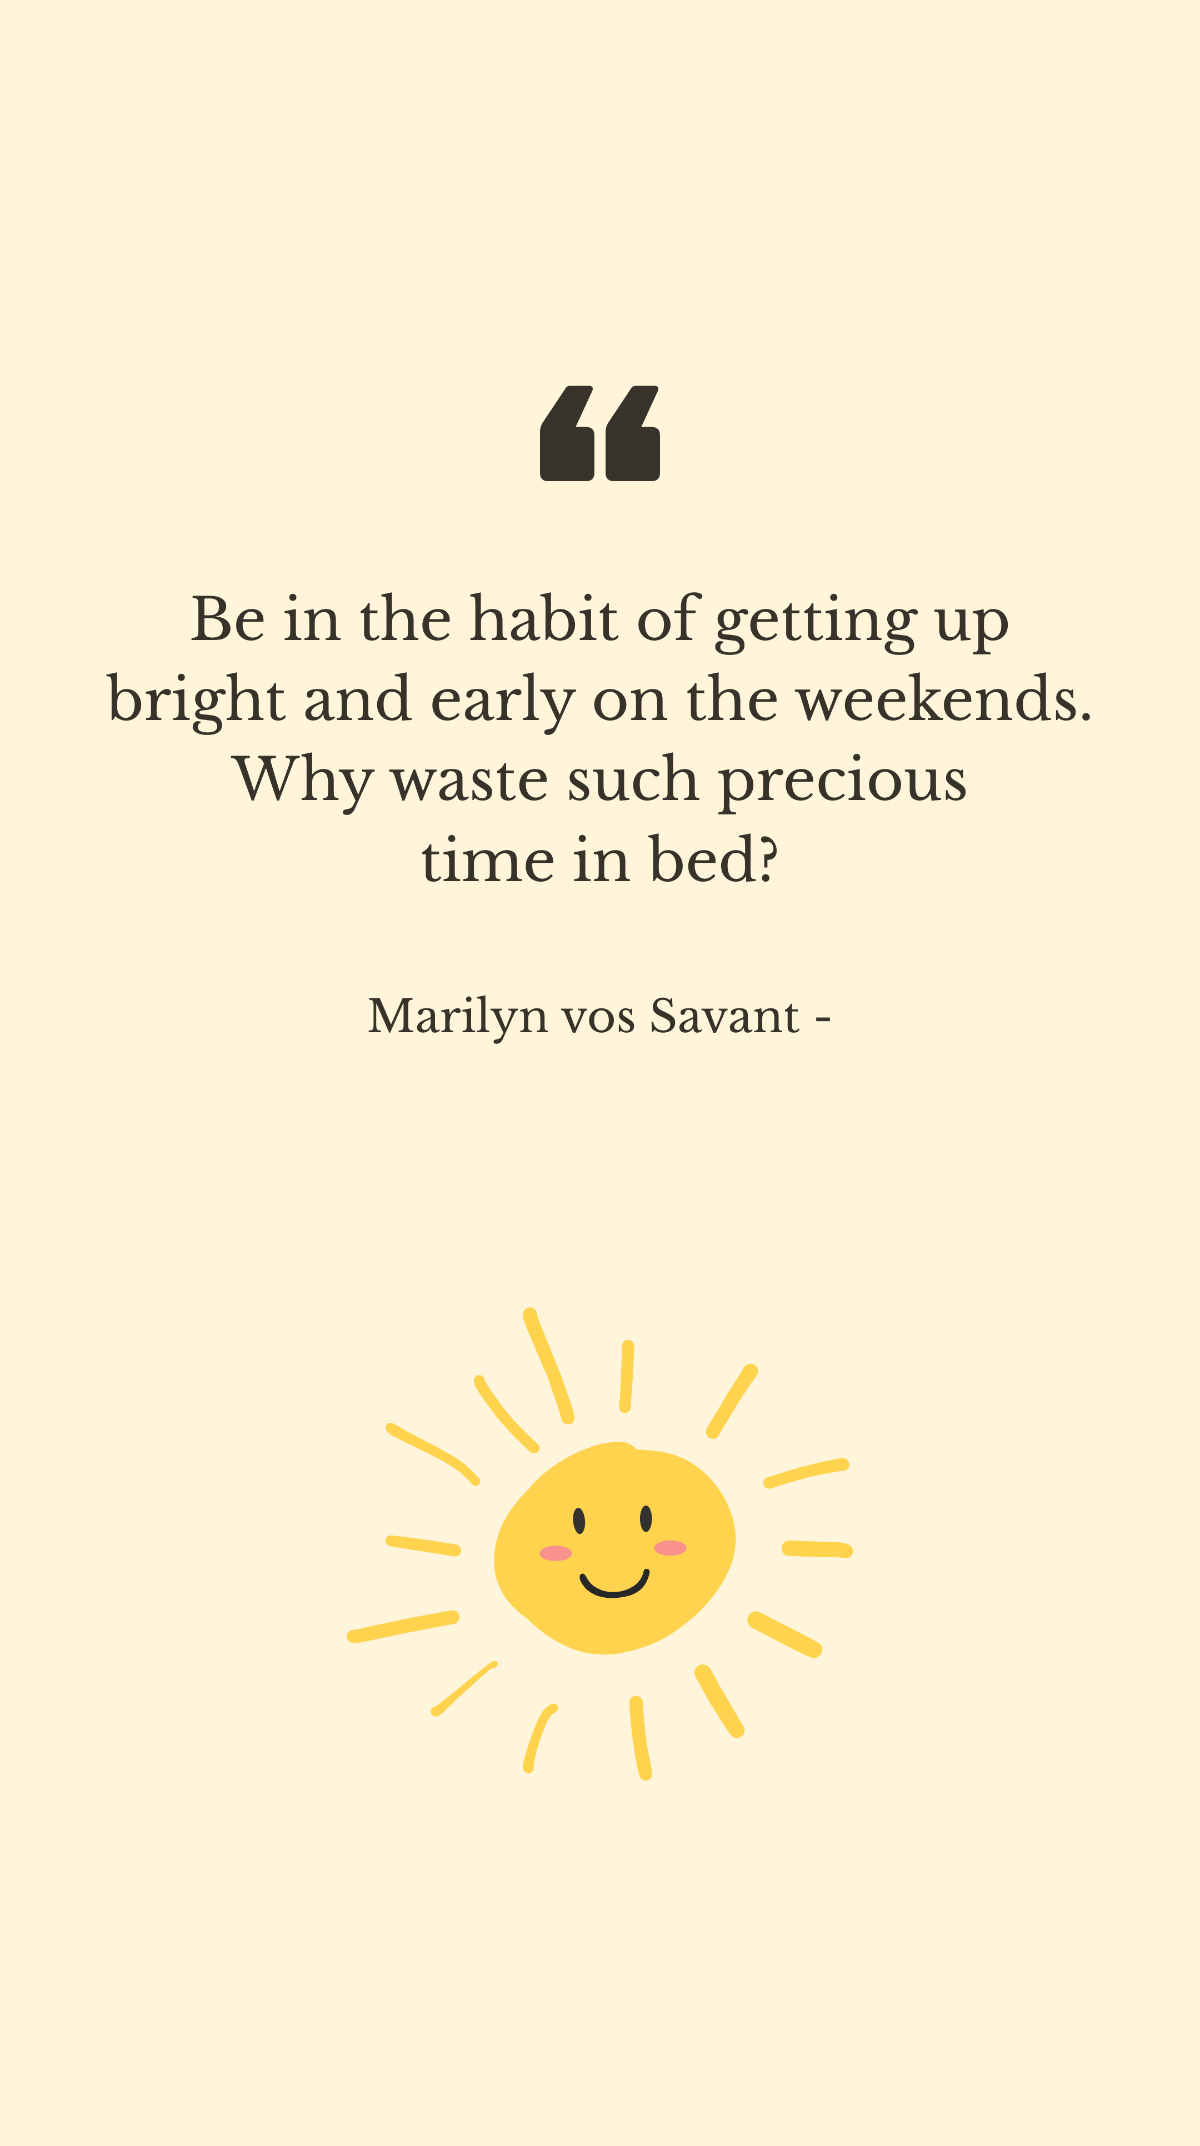 Marilyn vos Savant - Be in the habit of getting up bright and early on the weekends. Why waste such precious time in bed? Template